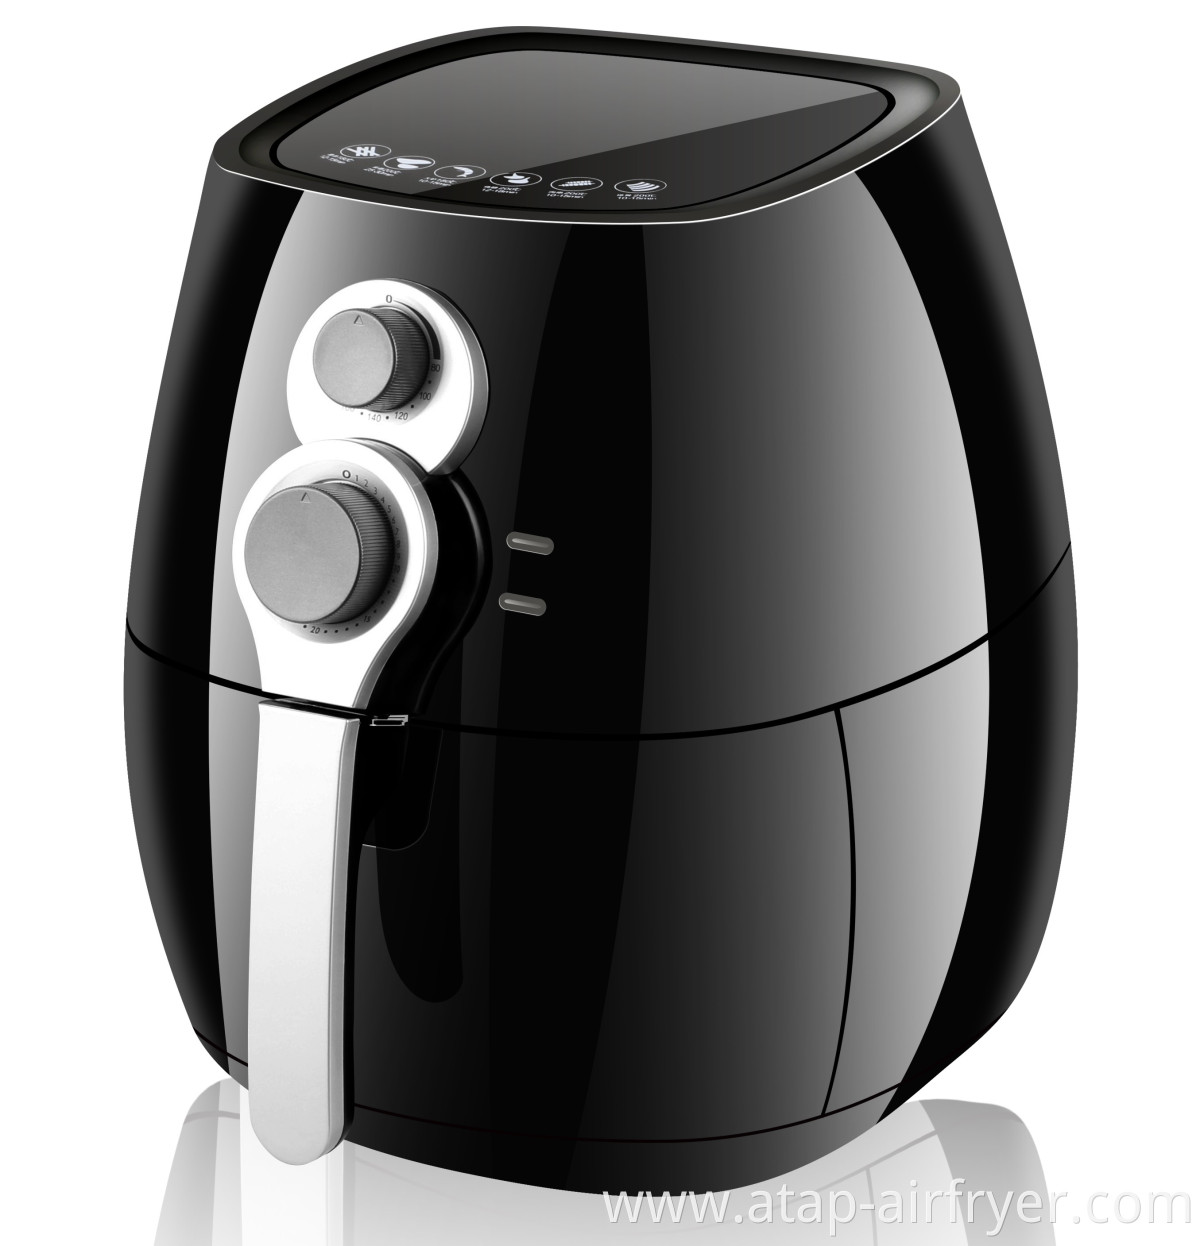 3.5L Capacity and Easily Cleaned Smart Air Fryer